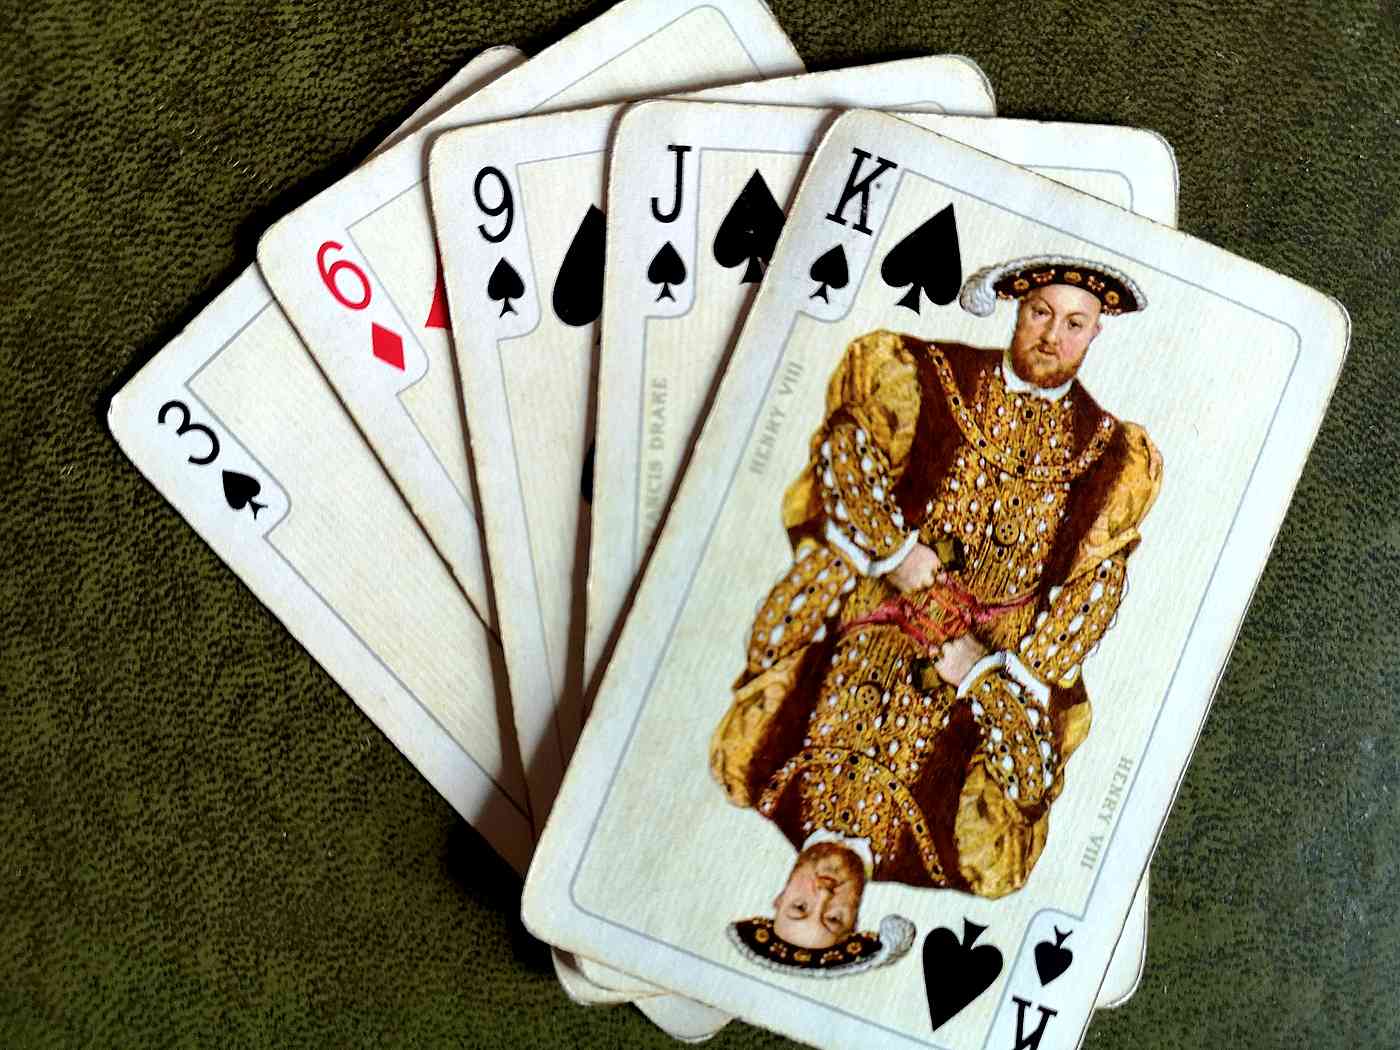 playing cards - busted flush?